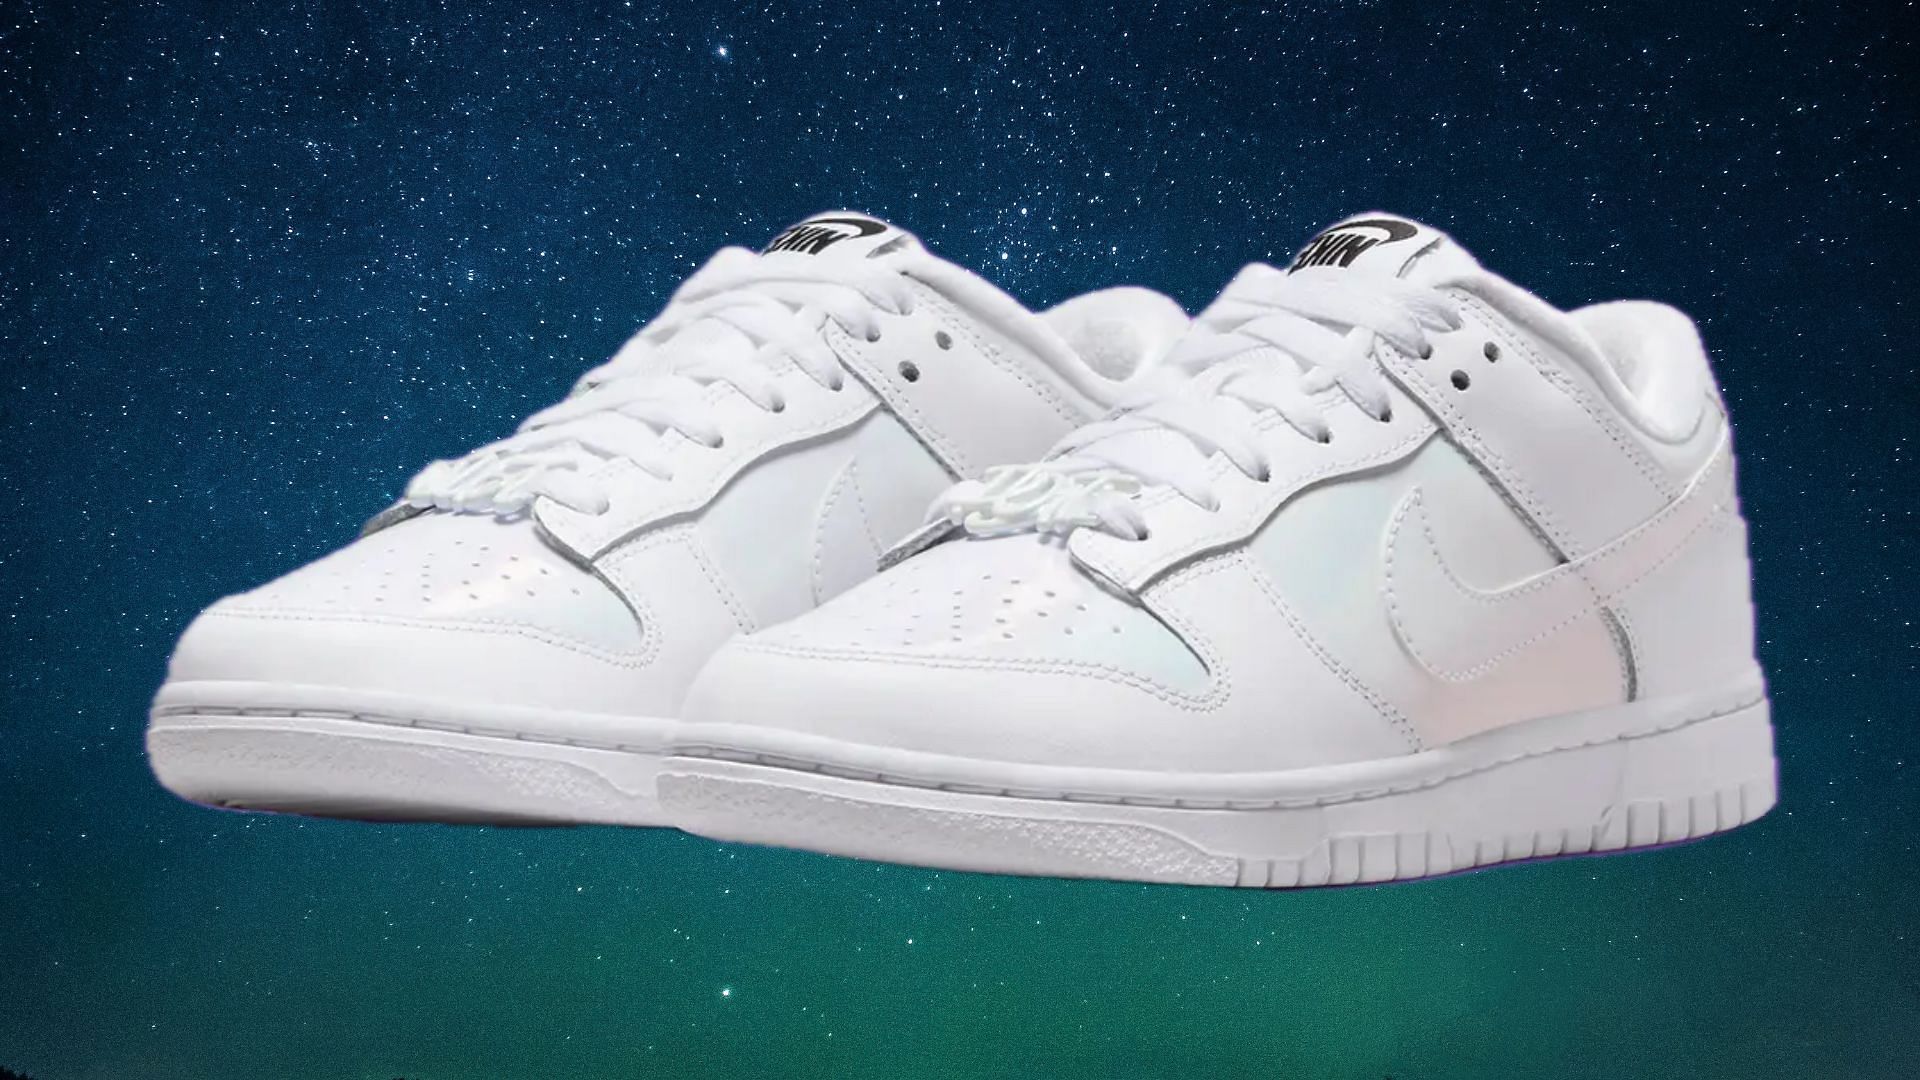 Nike Dunk Low Just Do It sneakers (Image via Nike)